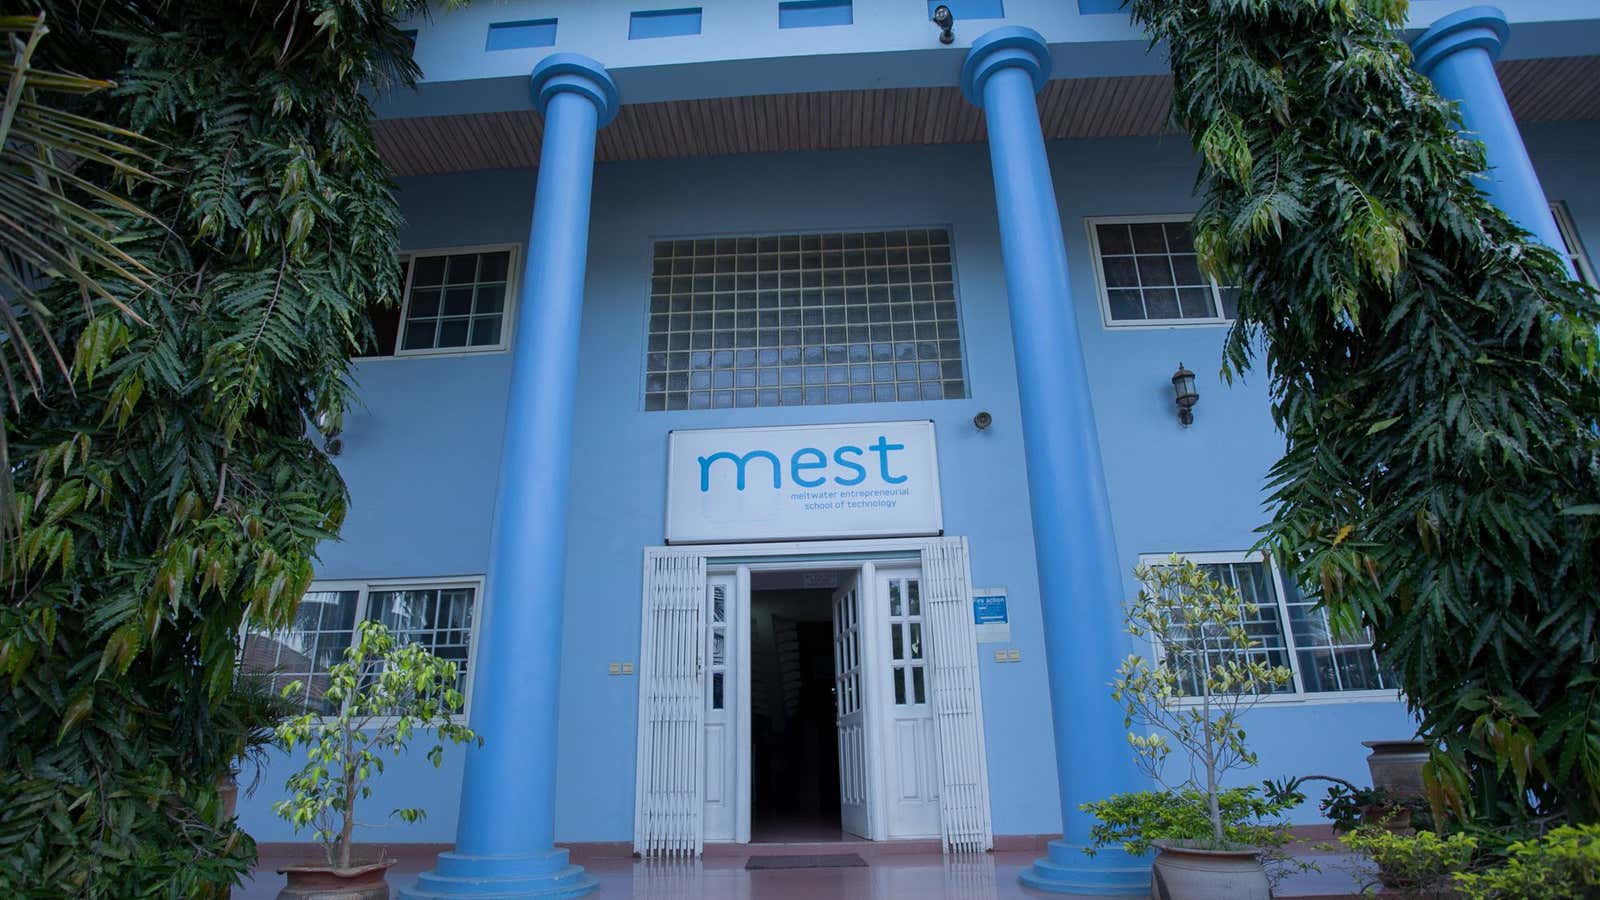 MEST in Accra, Ghana is now going pan-African.